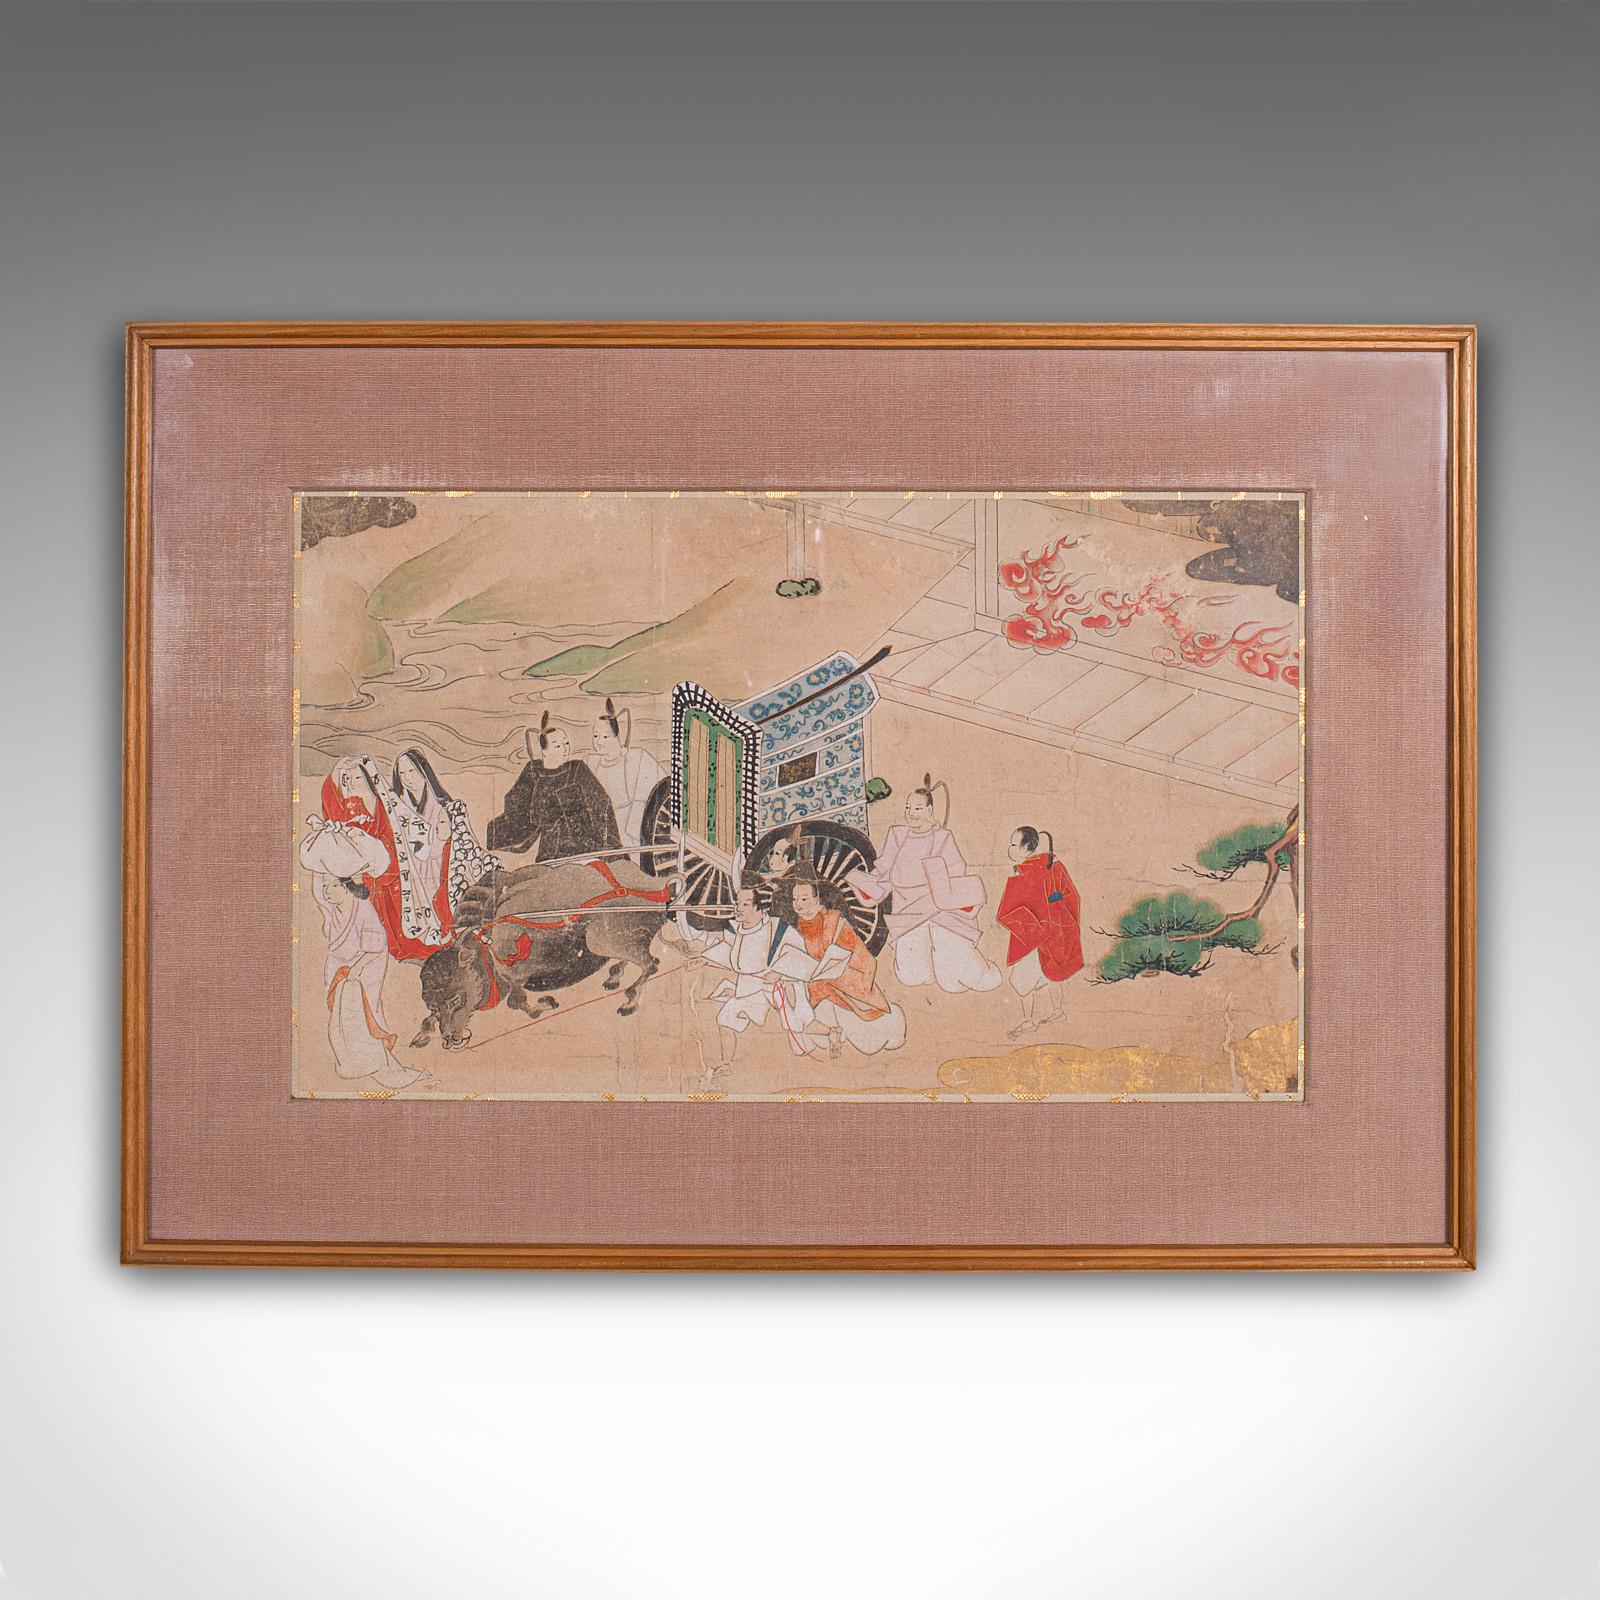 This is an antique framed woodblock print. A Japanese, after Heian era art scene, dating to the late Victorian period, circa 1900.

The Heian period of Japanese history existed between 794 to 1185
Considered to be a high point for classic